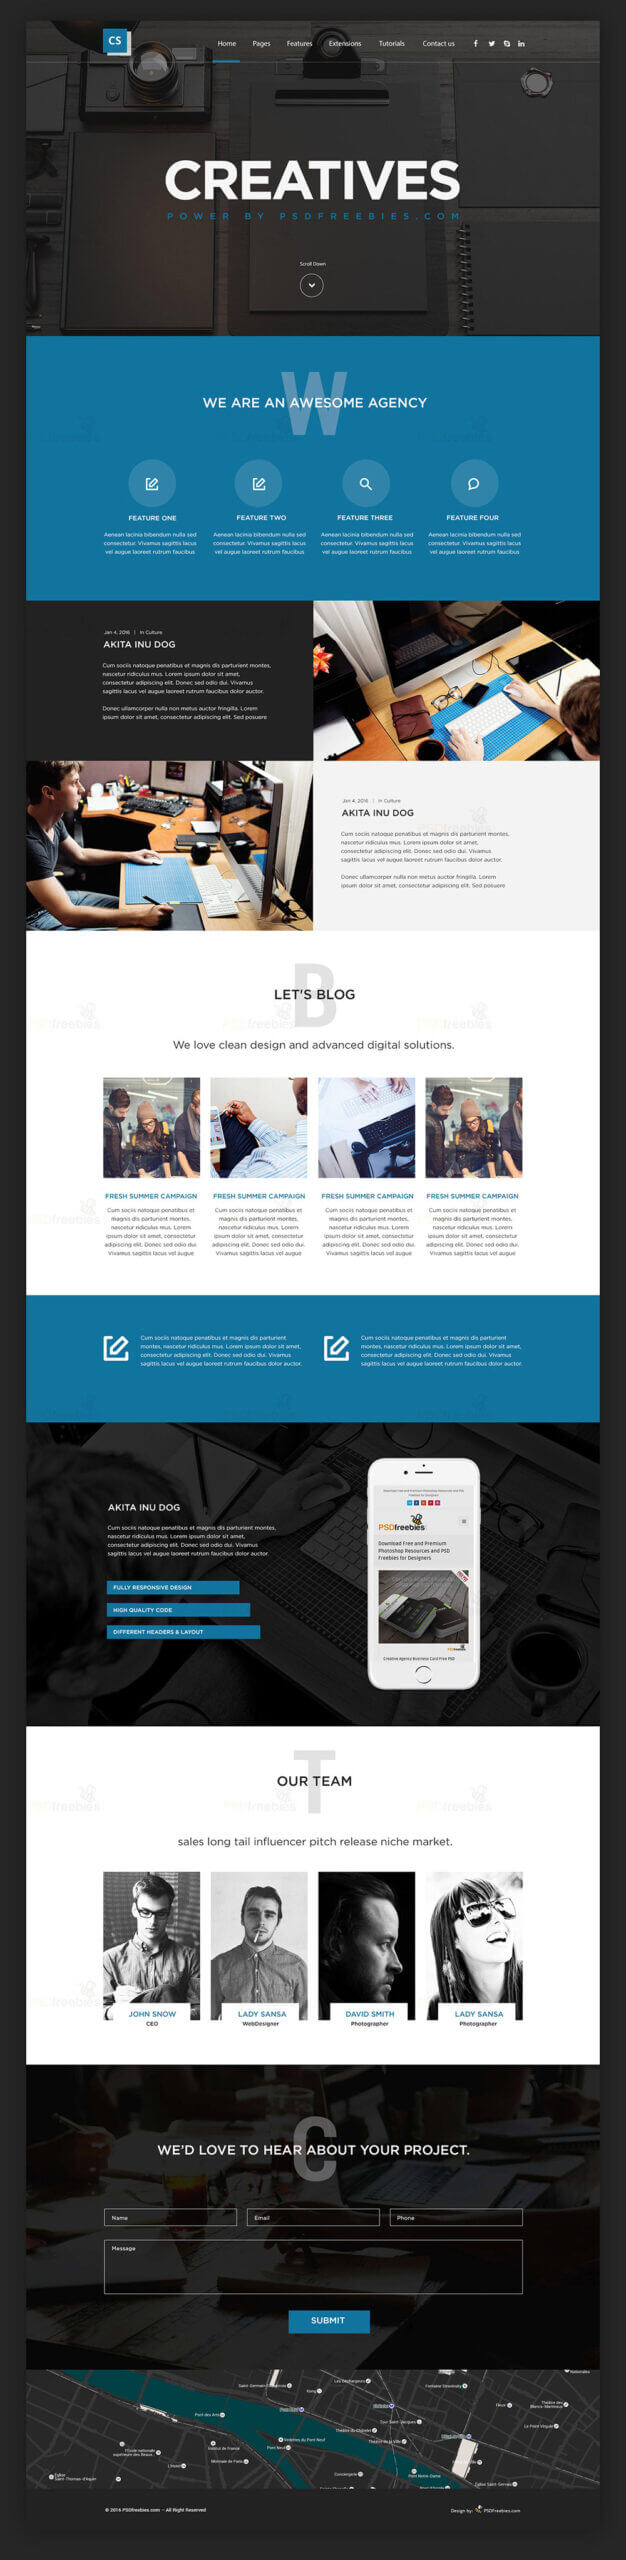 007 Template Ideas Free Download Web Layout Awful Psd Design Throughout Business Website Templates Psd Free Download